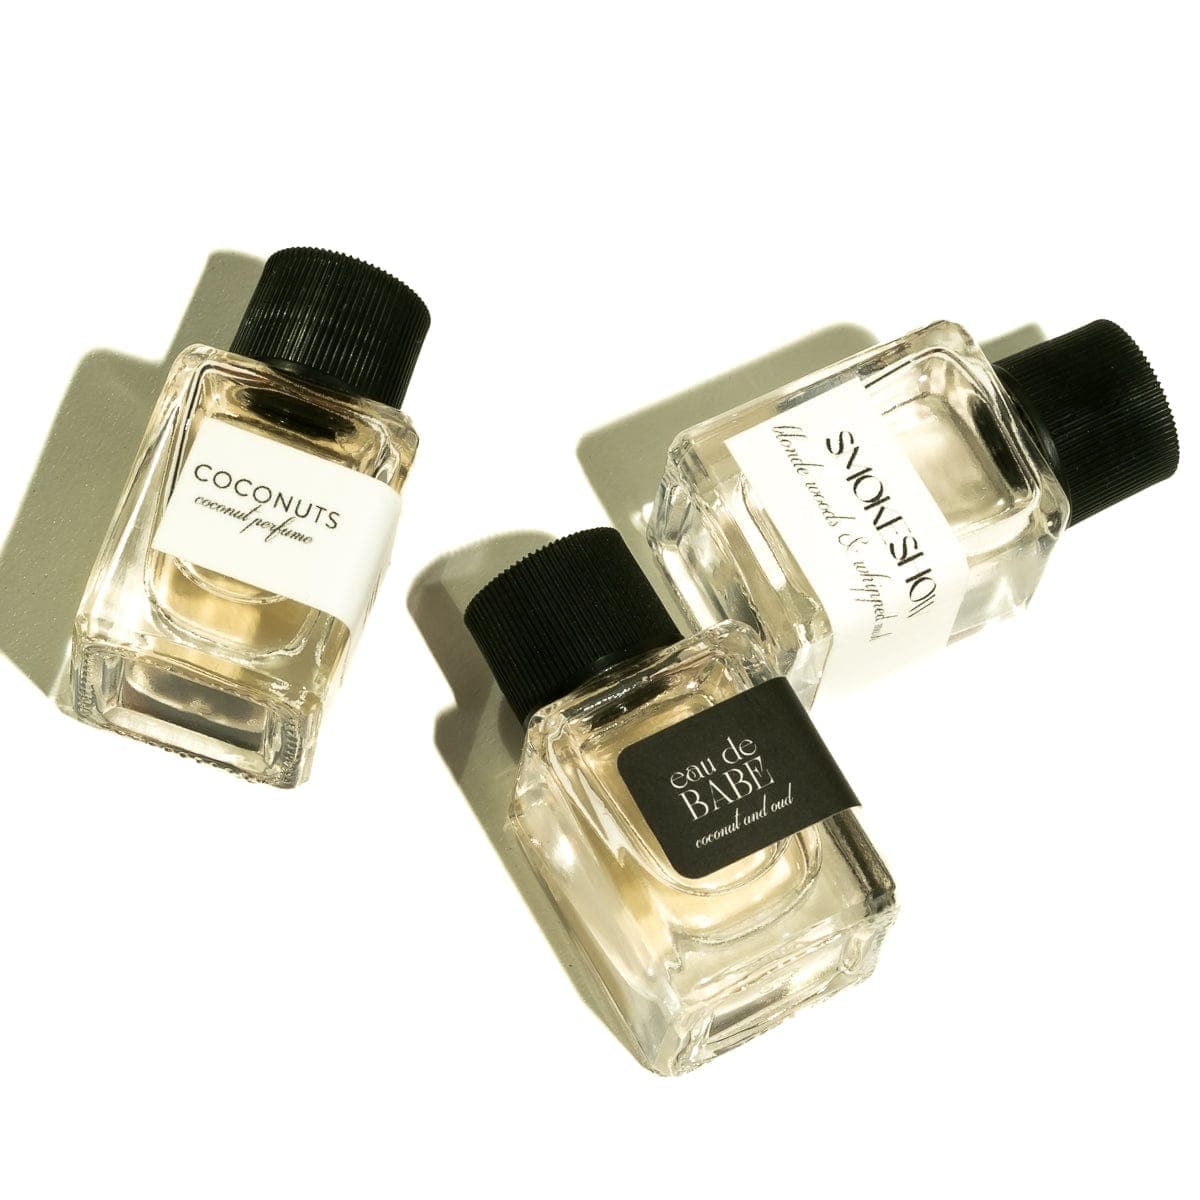 Try Me Trio - Coconuts Eau de Babe and Smokeshow Try before you buy